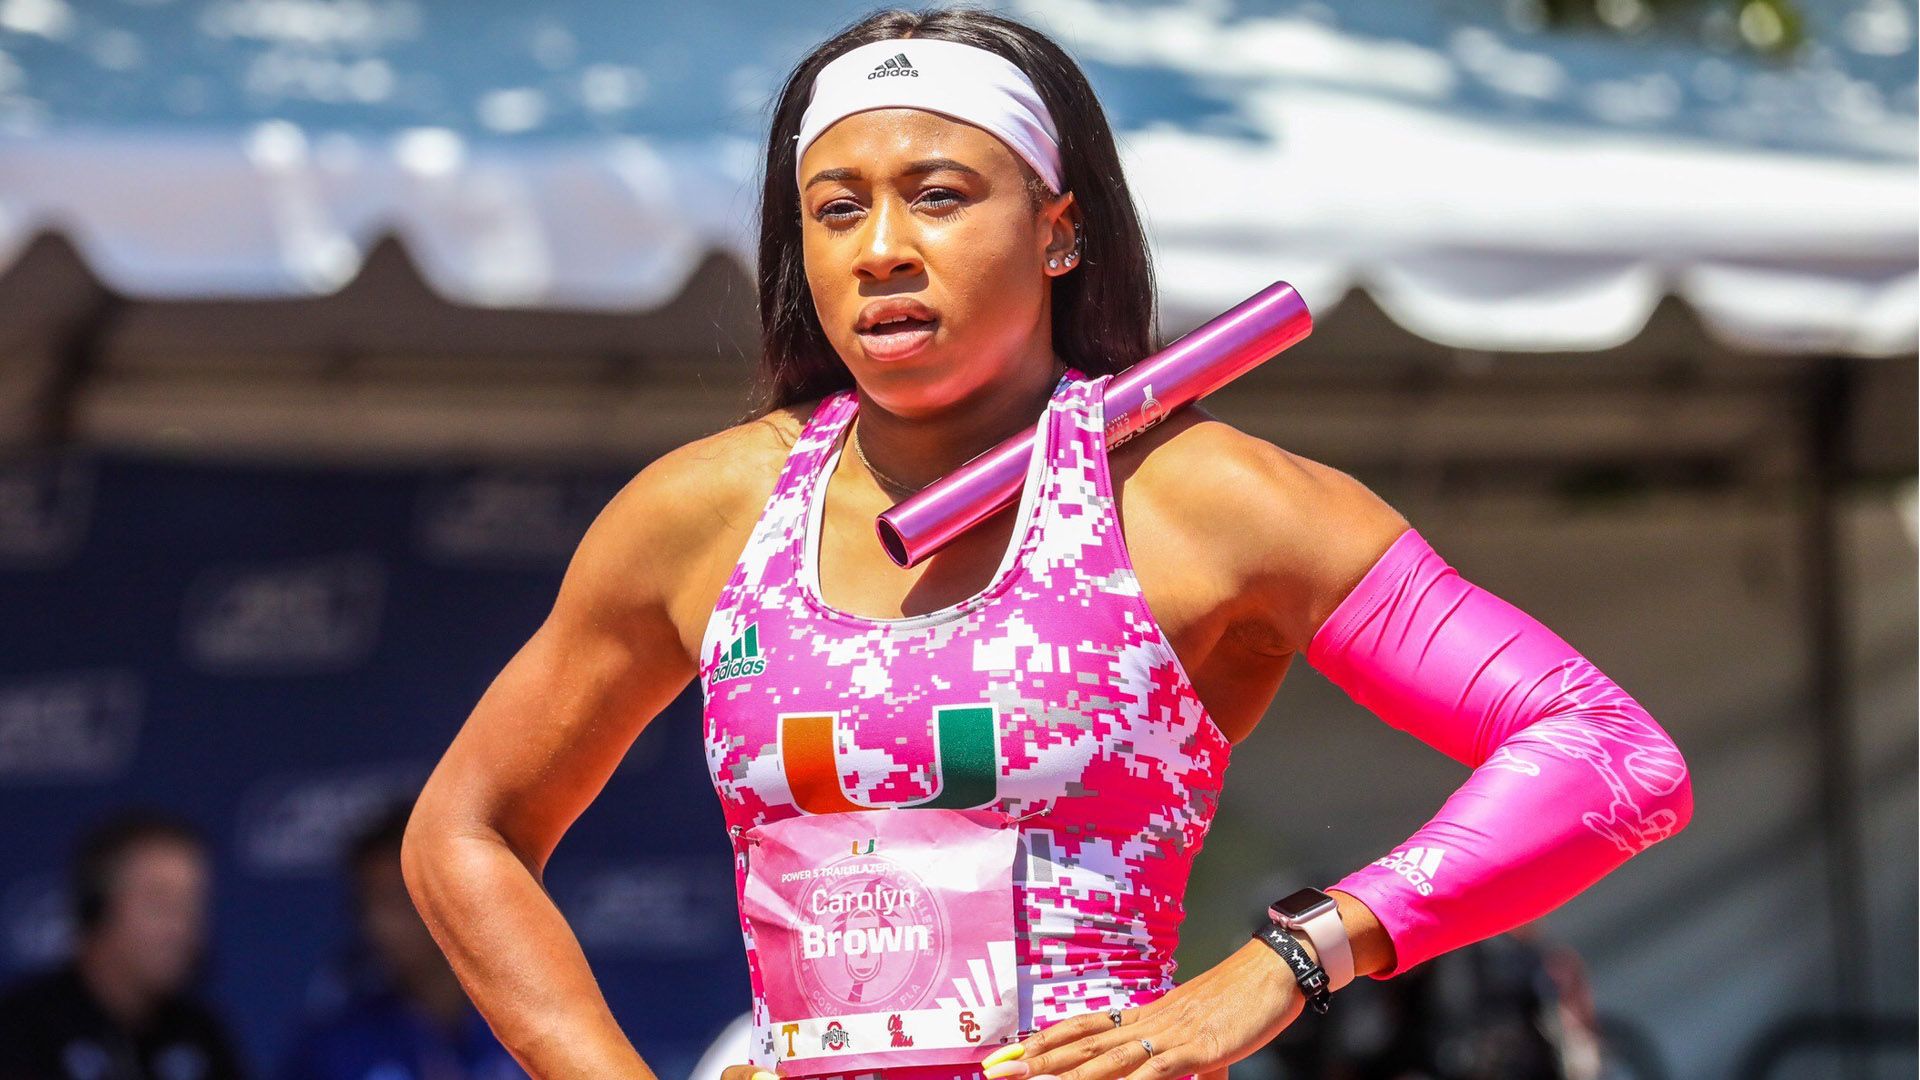 Talking Track with Carolyn Brown